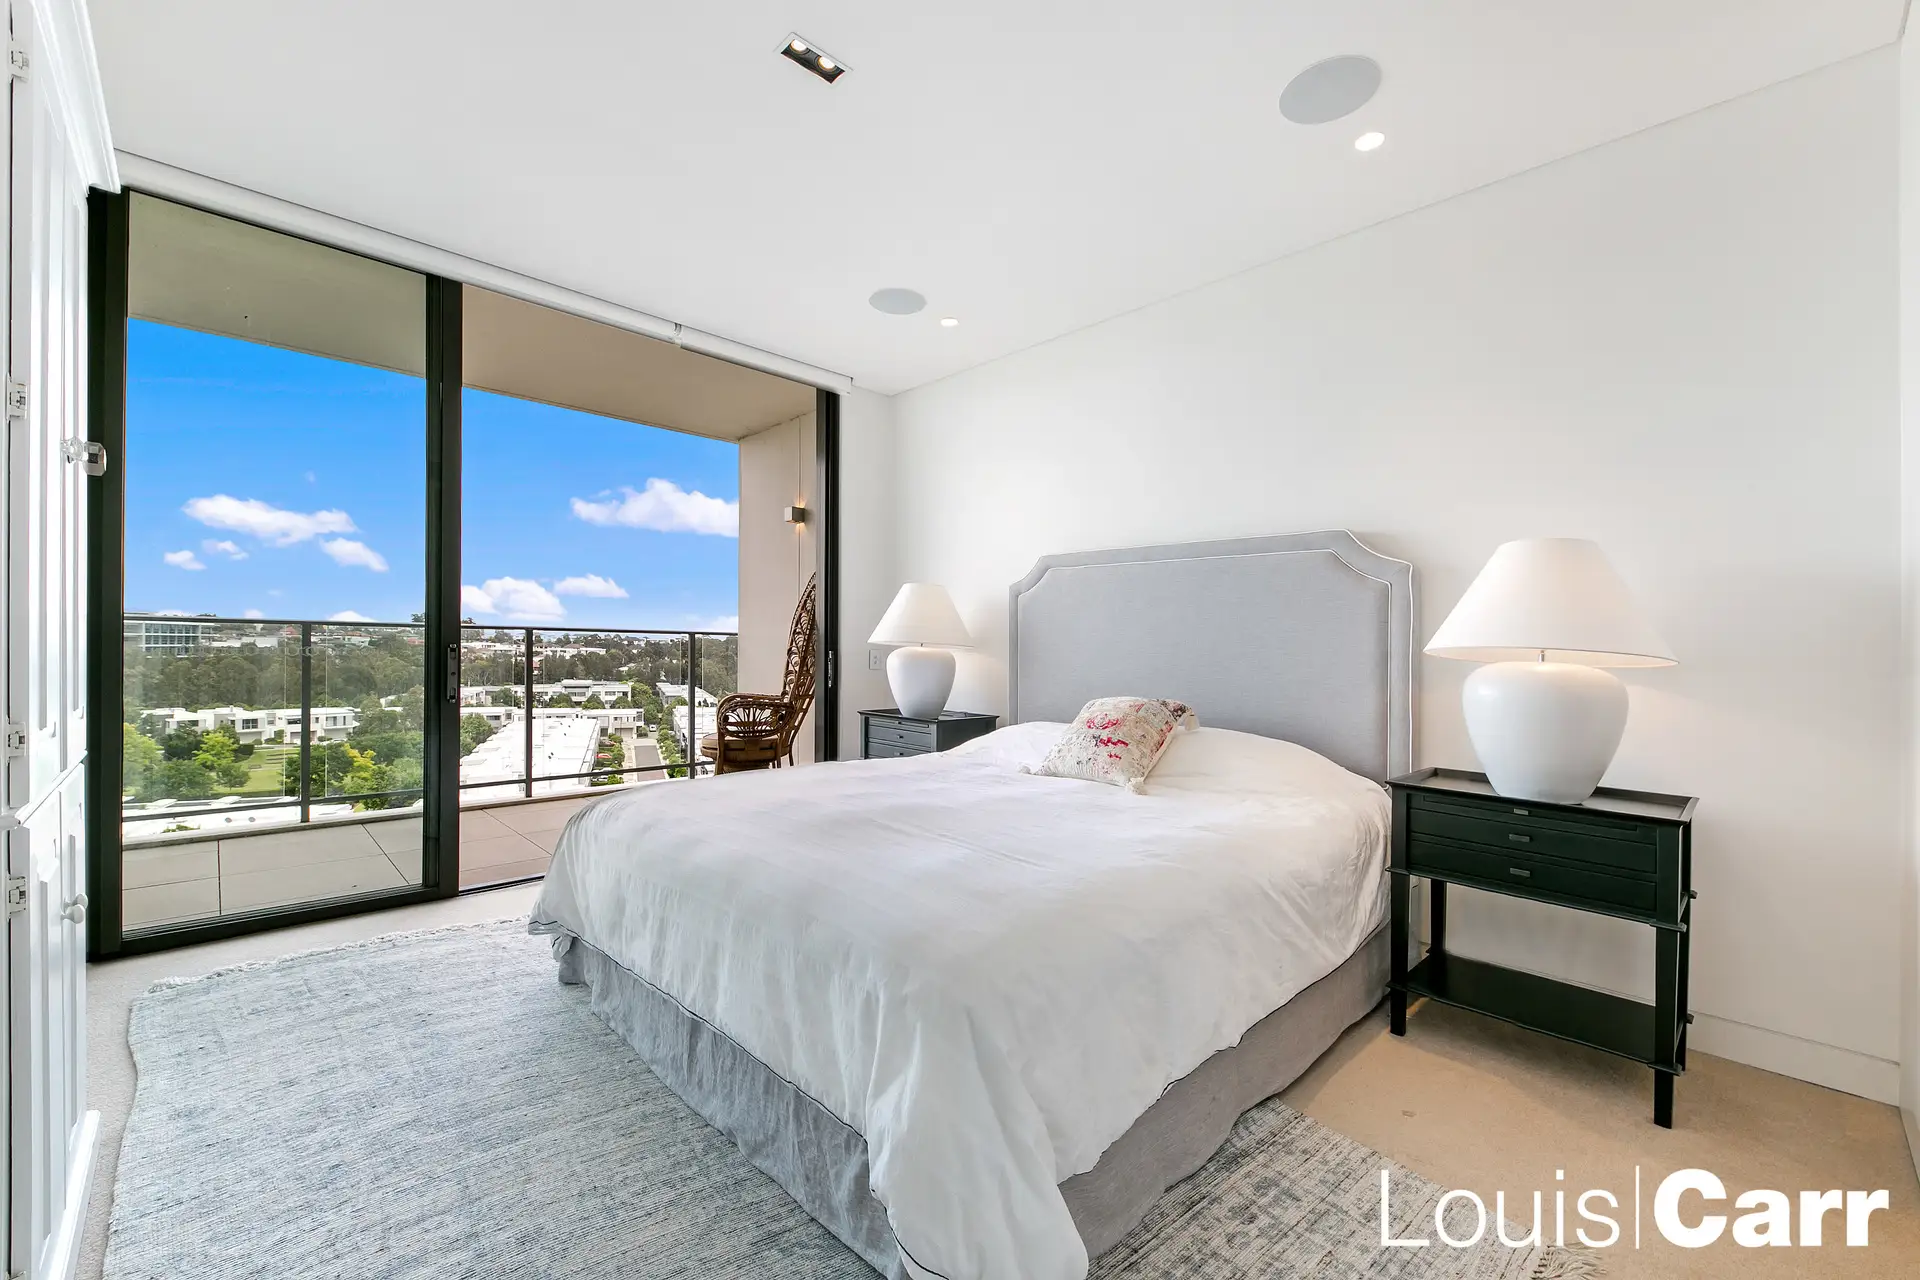 Photo #6: 75/38 Solent Circuit, Norwest - Sold by Louis Carr Real Estate